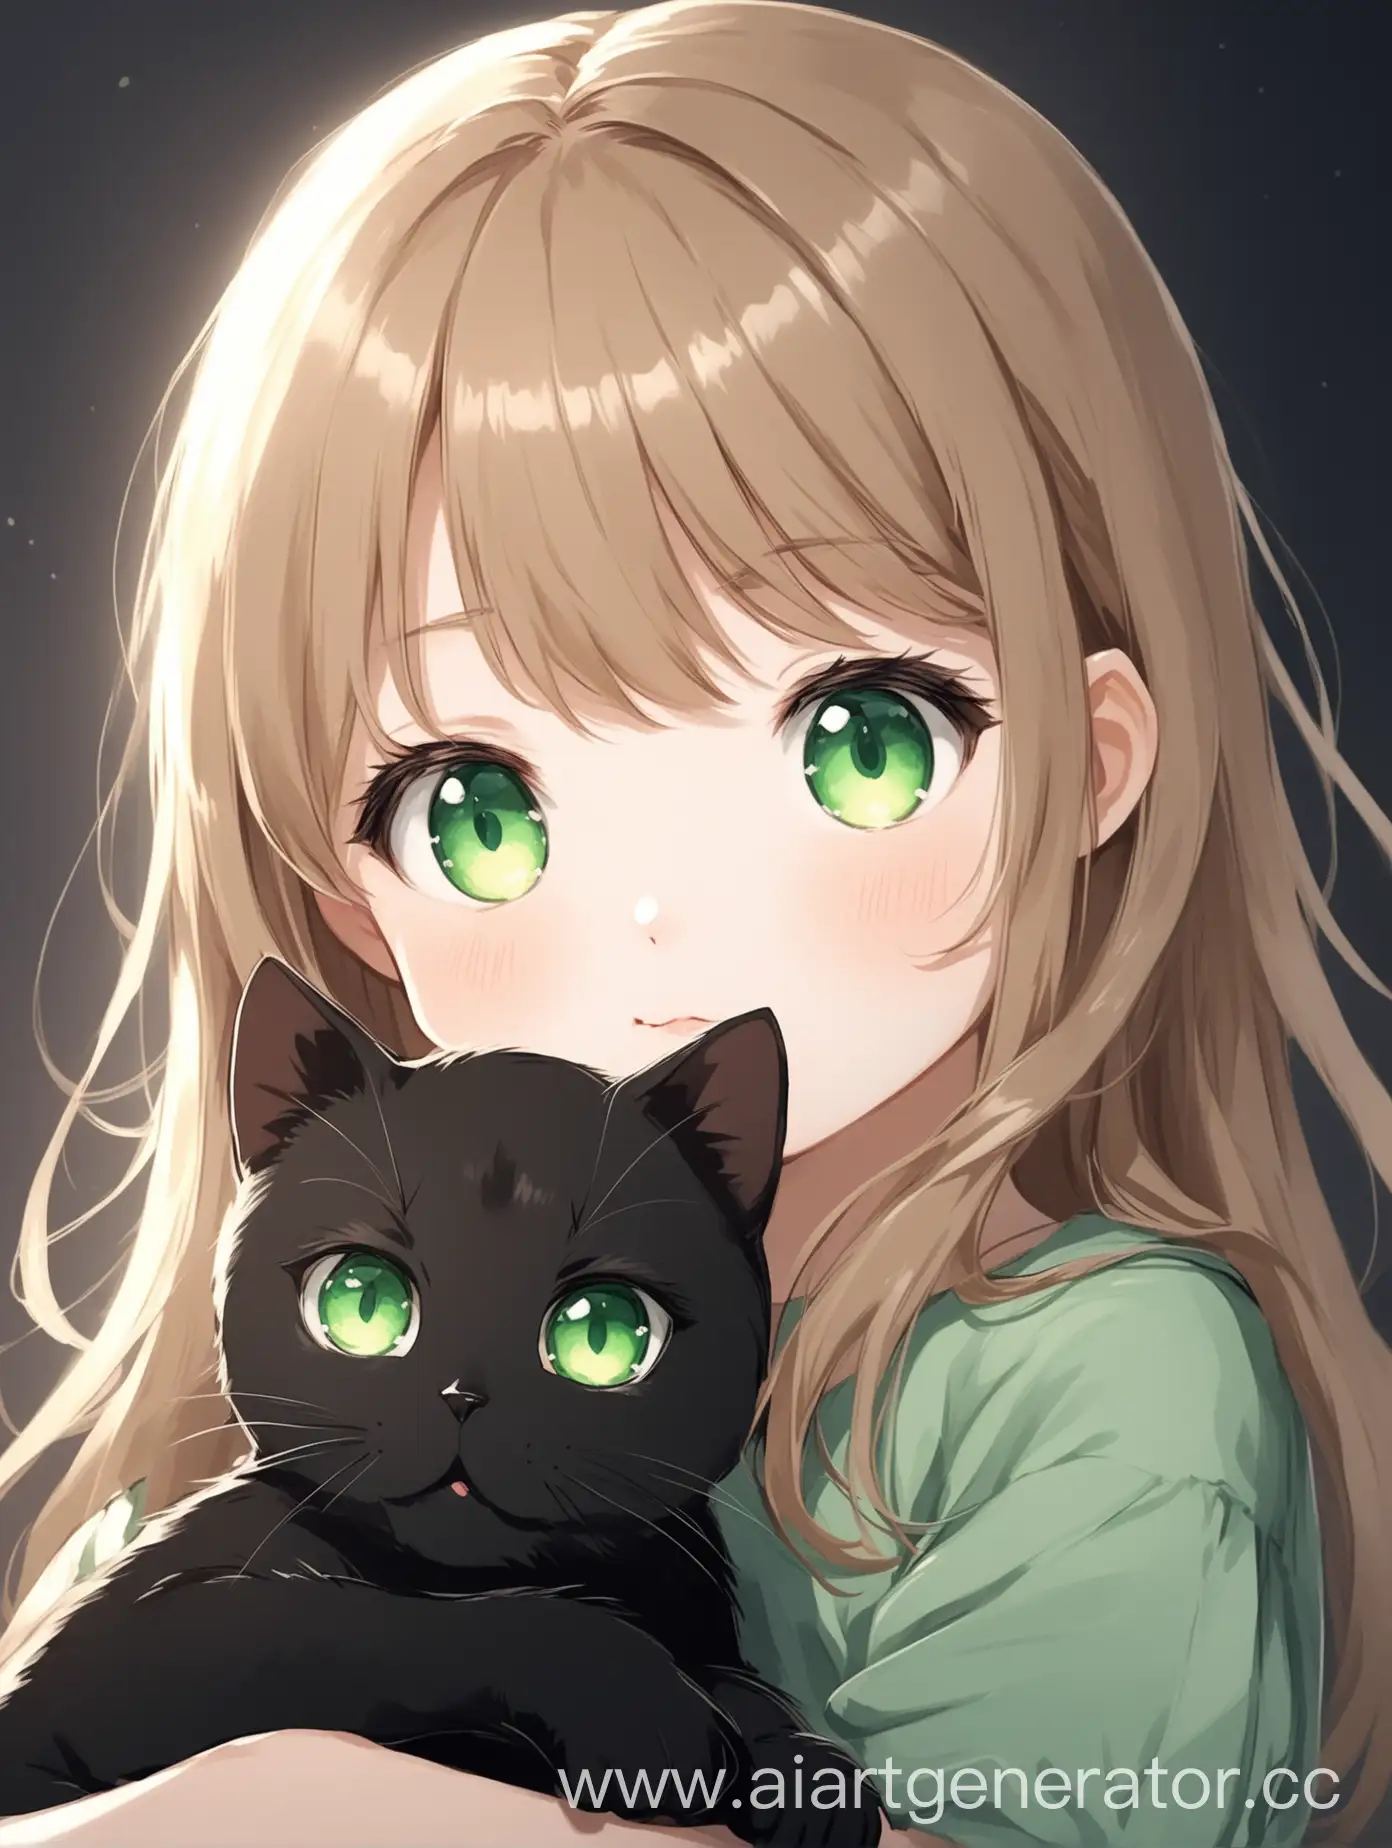 Adorable-Young-Girl-with-Black-Cat-Innocence-and-Affection